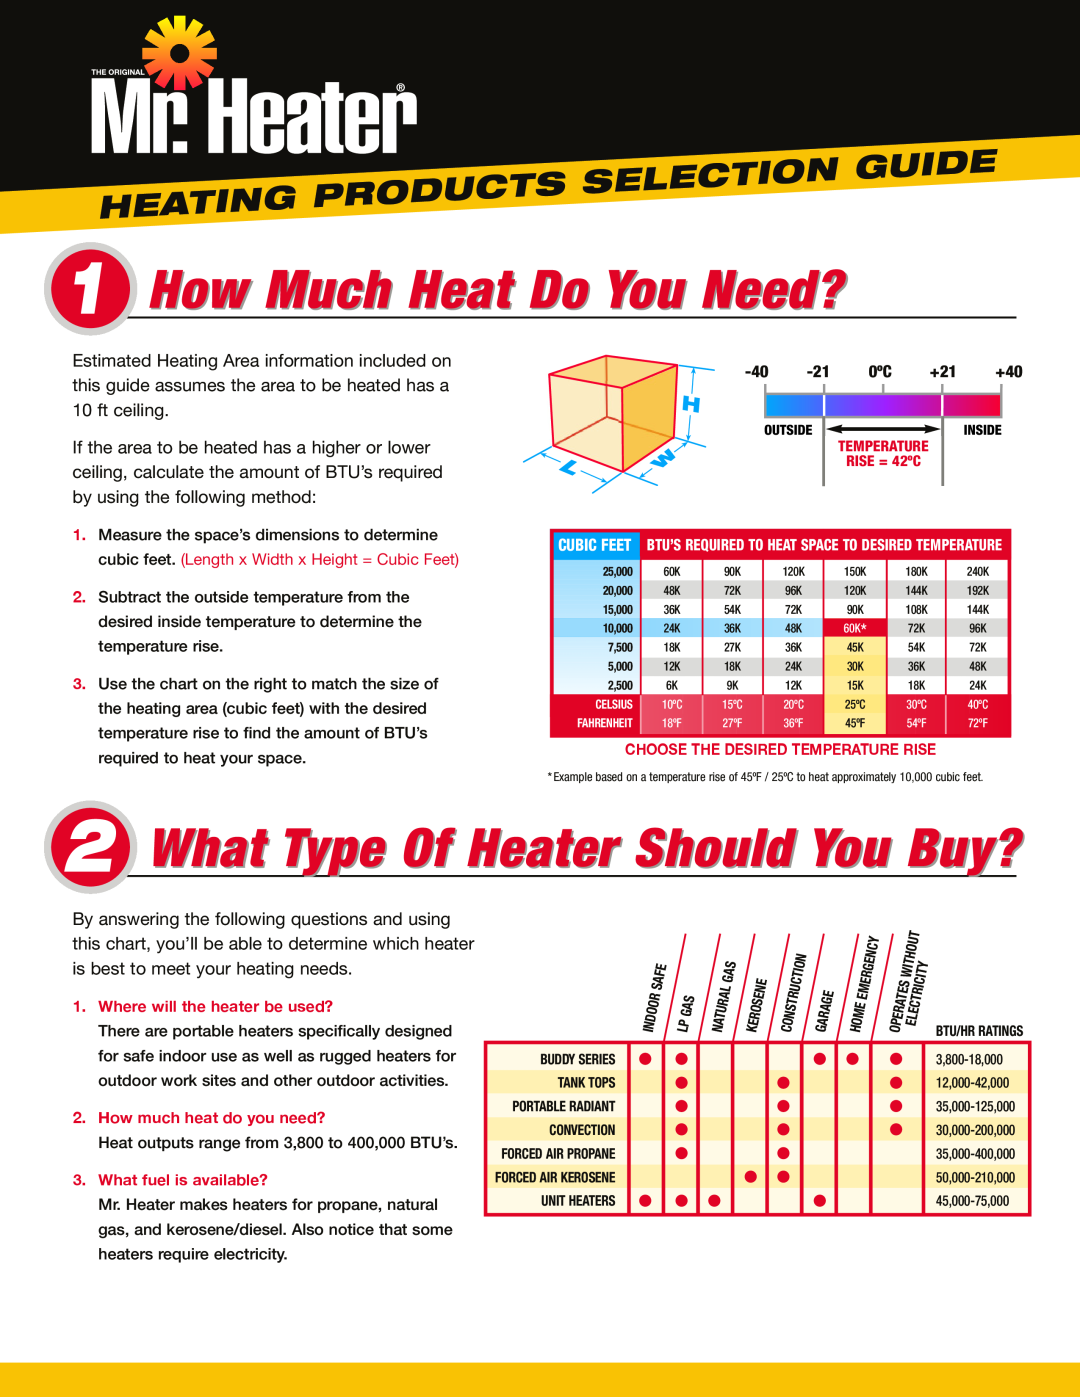 Mr. Heater Air Conditioner dimensions How Much Heat Do You Need?, What Type Of Heater Should You Buy?, Products, Selection 